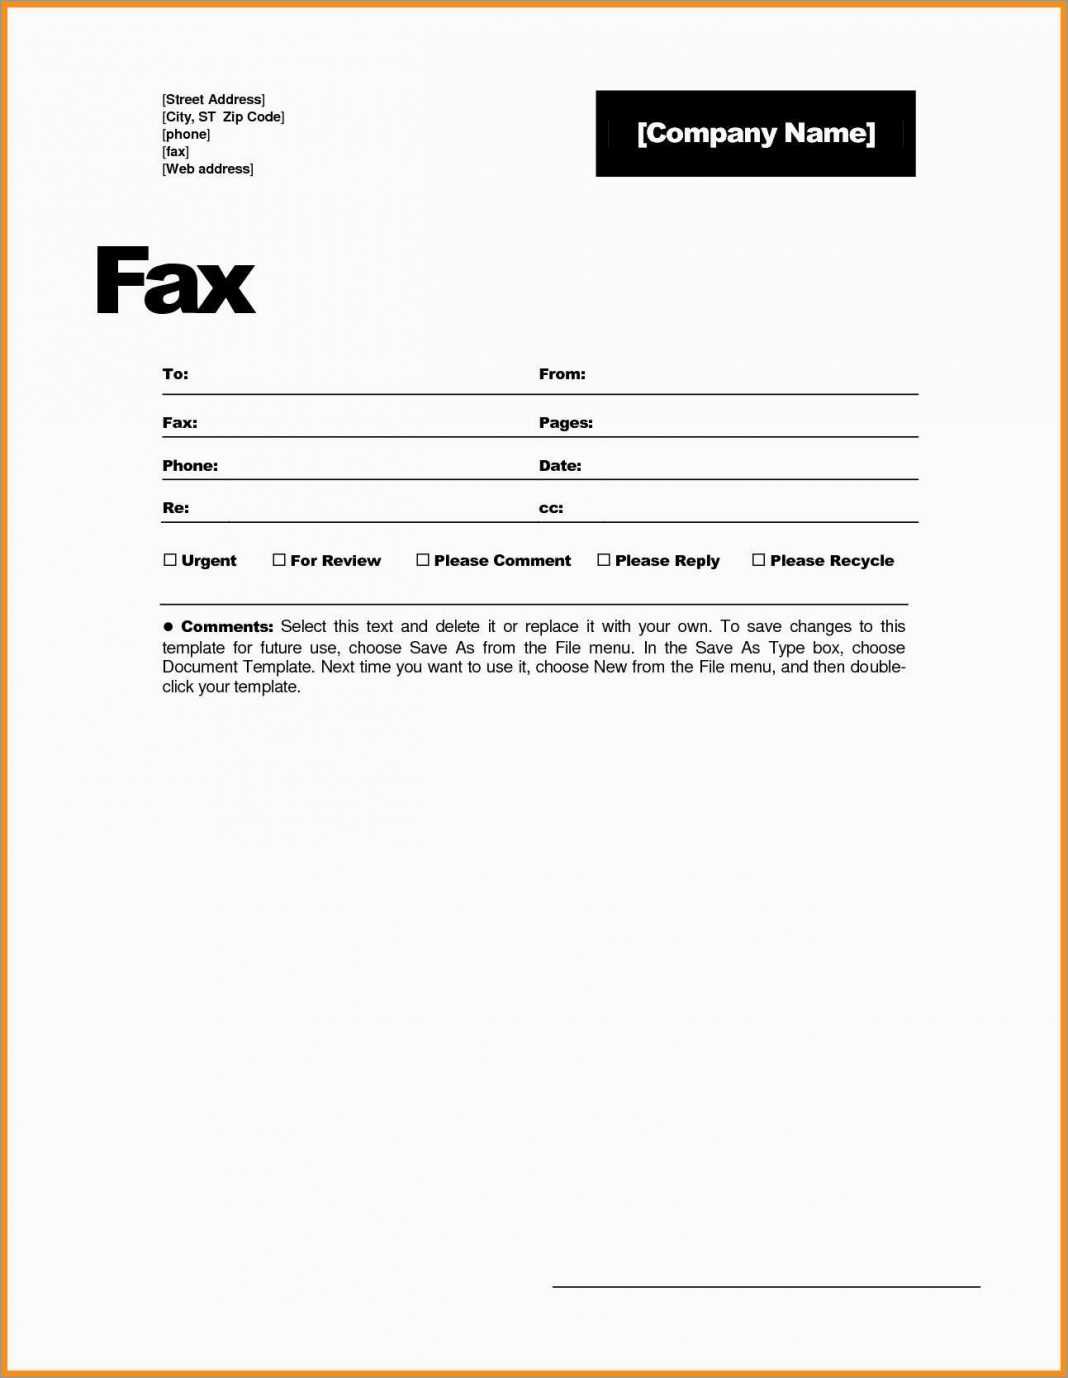 Fax Cover Sheet Template Word Spreadsheet Examples Printable In Fax Cover Sheet Template Word 2010